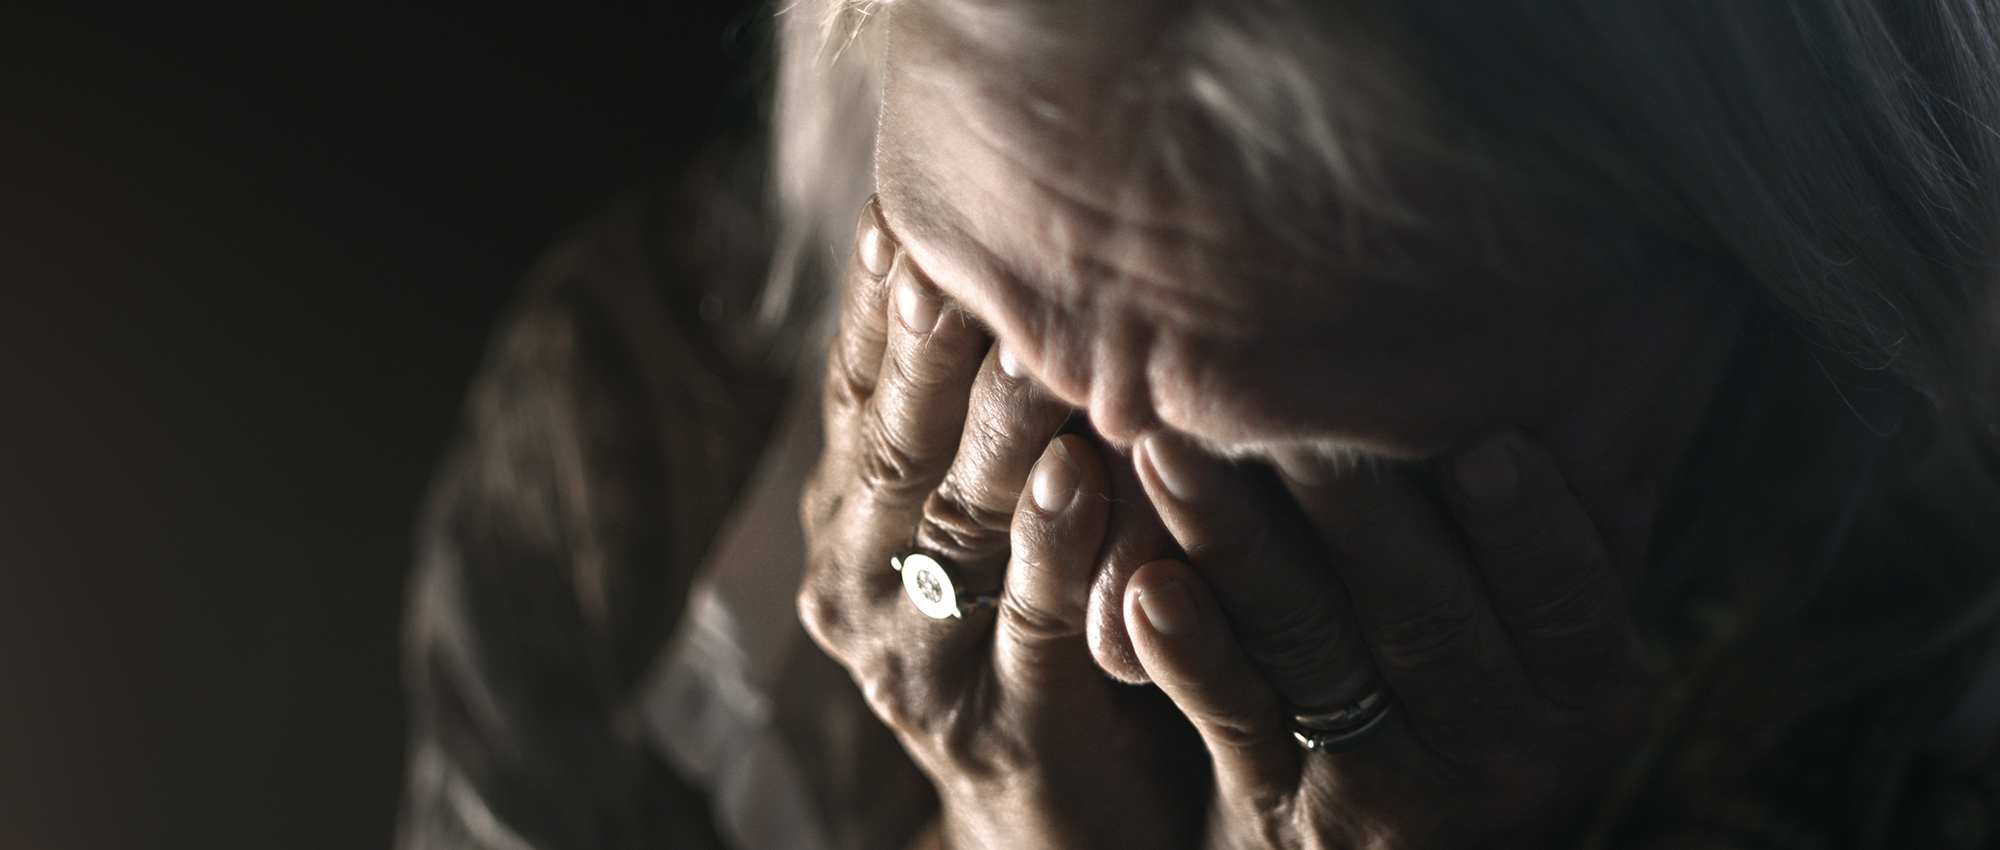 Older woman cries with sorrow.